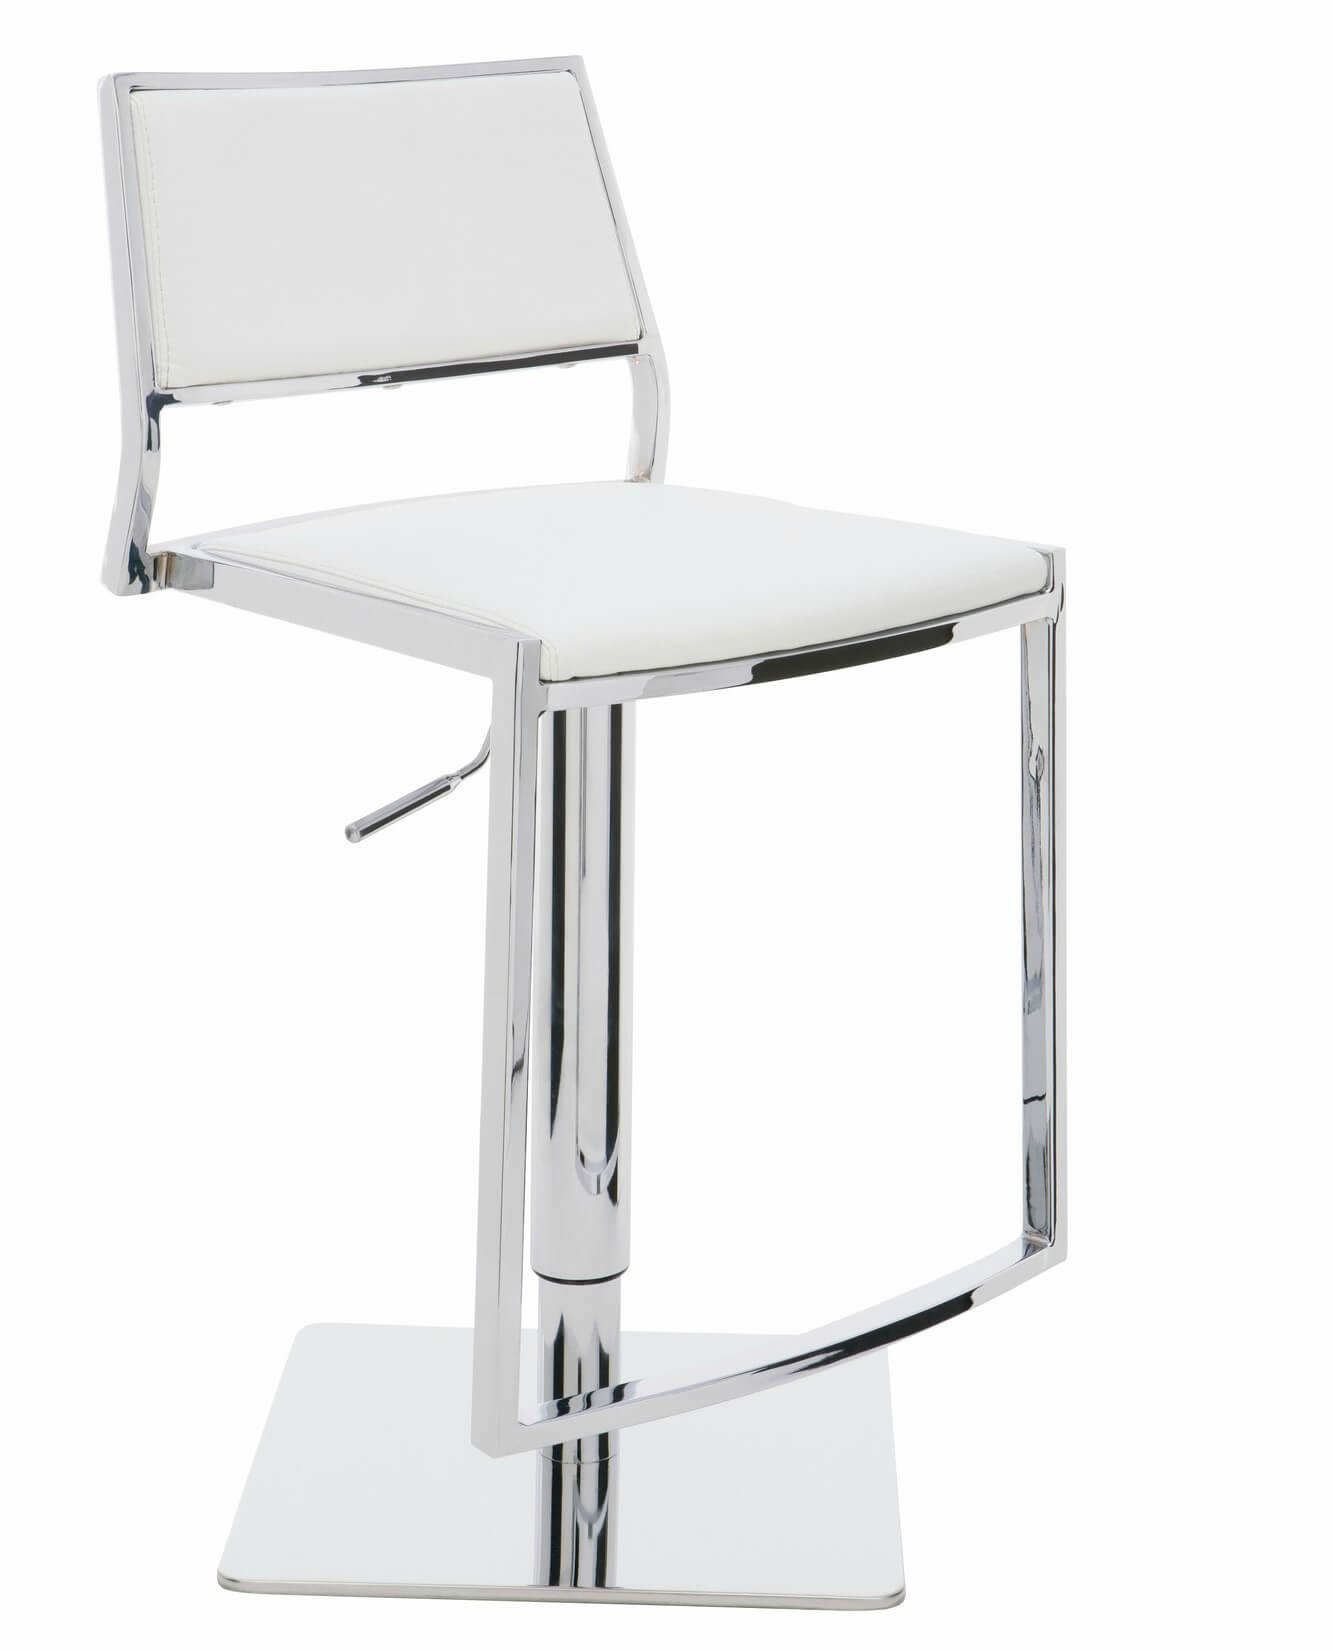 This adjustable white leather stool offers an extra wide seat